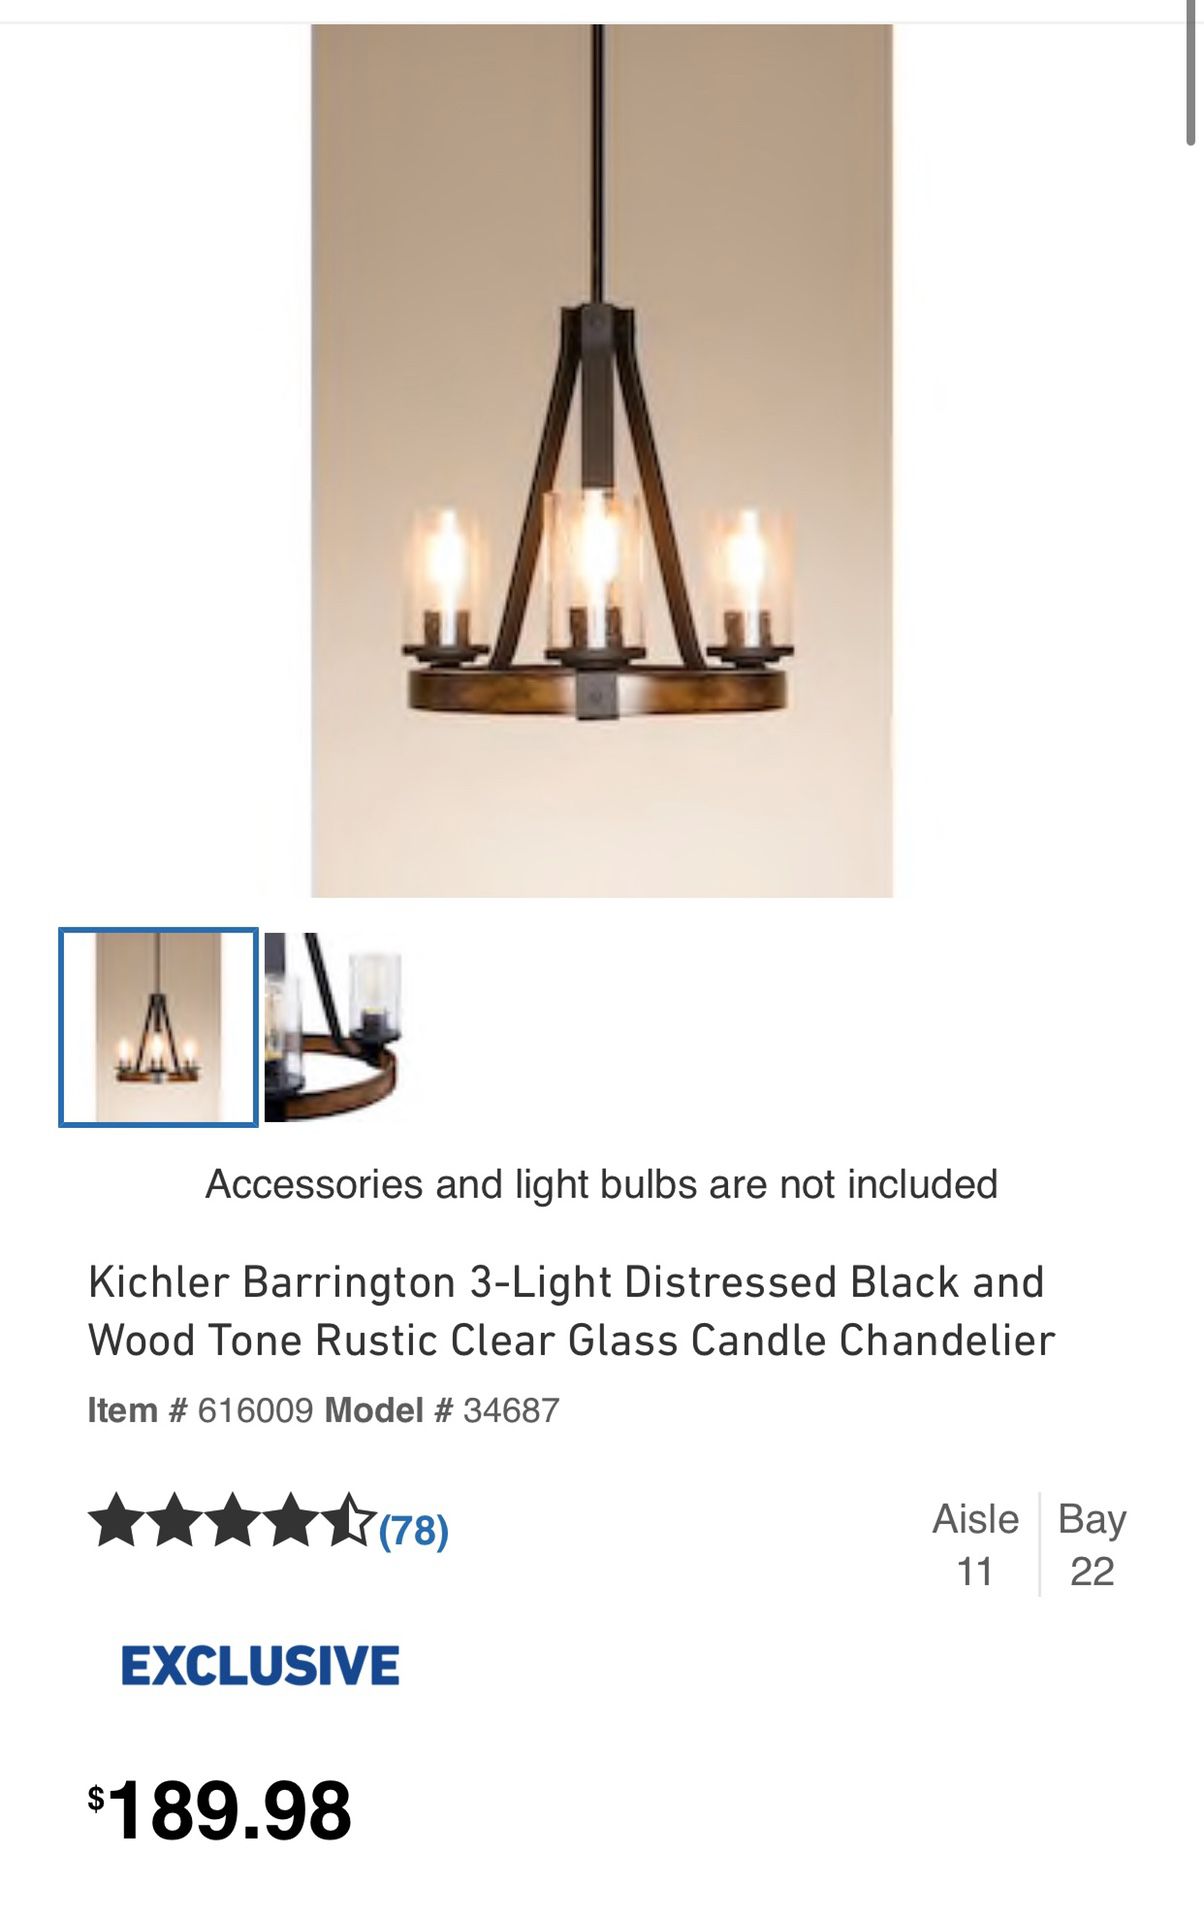 Kichler Barrington 3-Light Distressed Black and Wood Tone Rustic Clear Glass Candle Chandelier